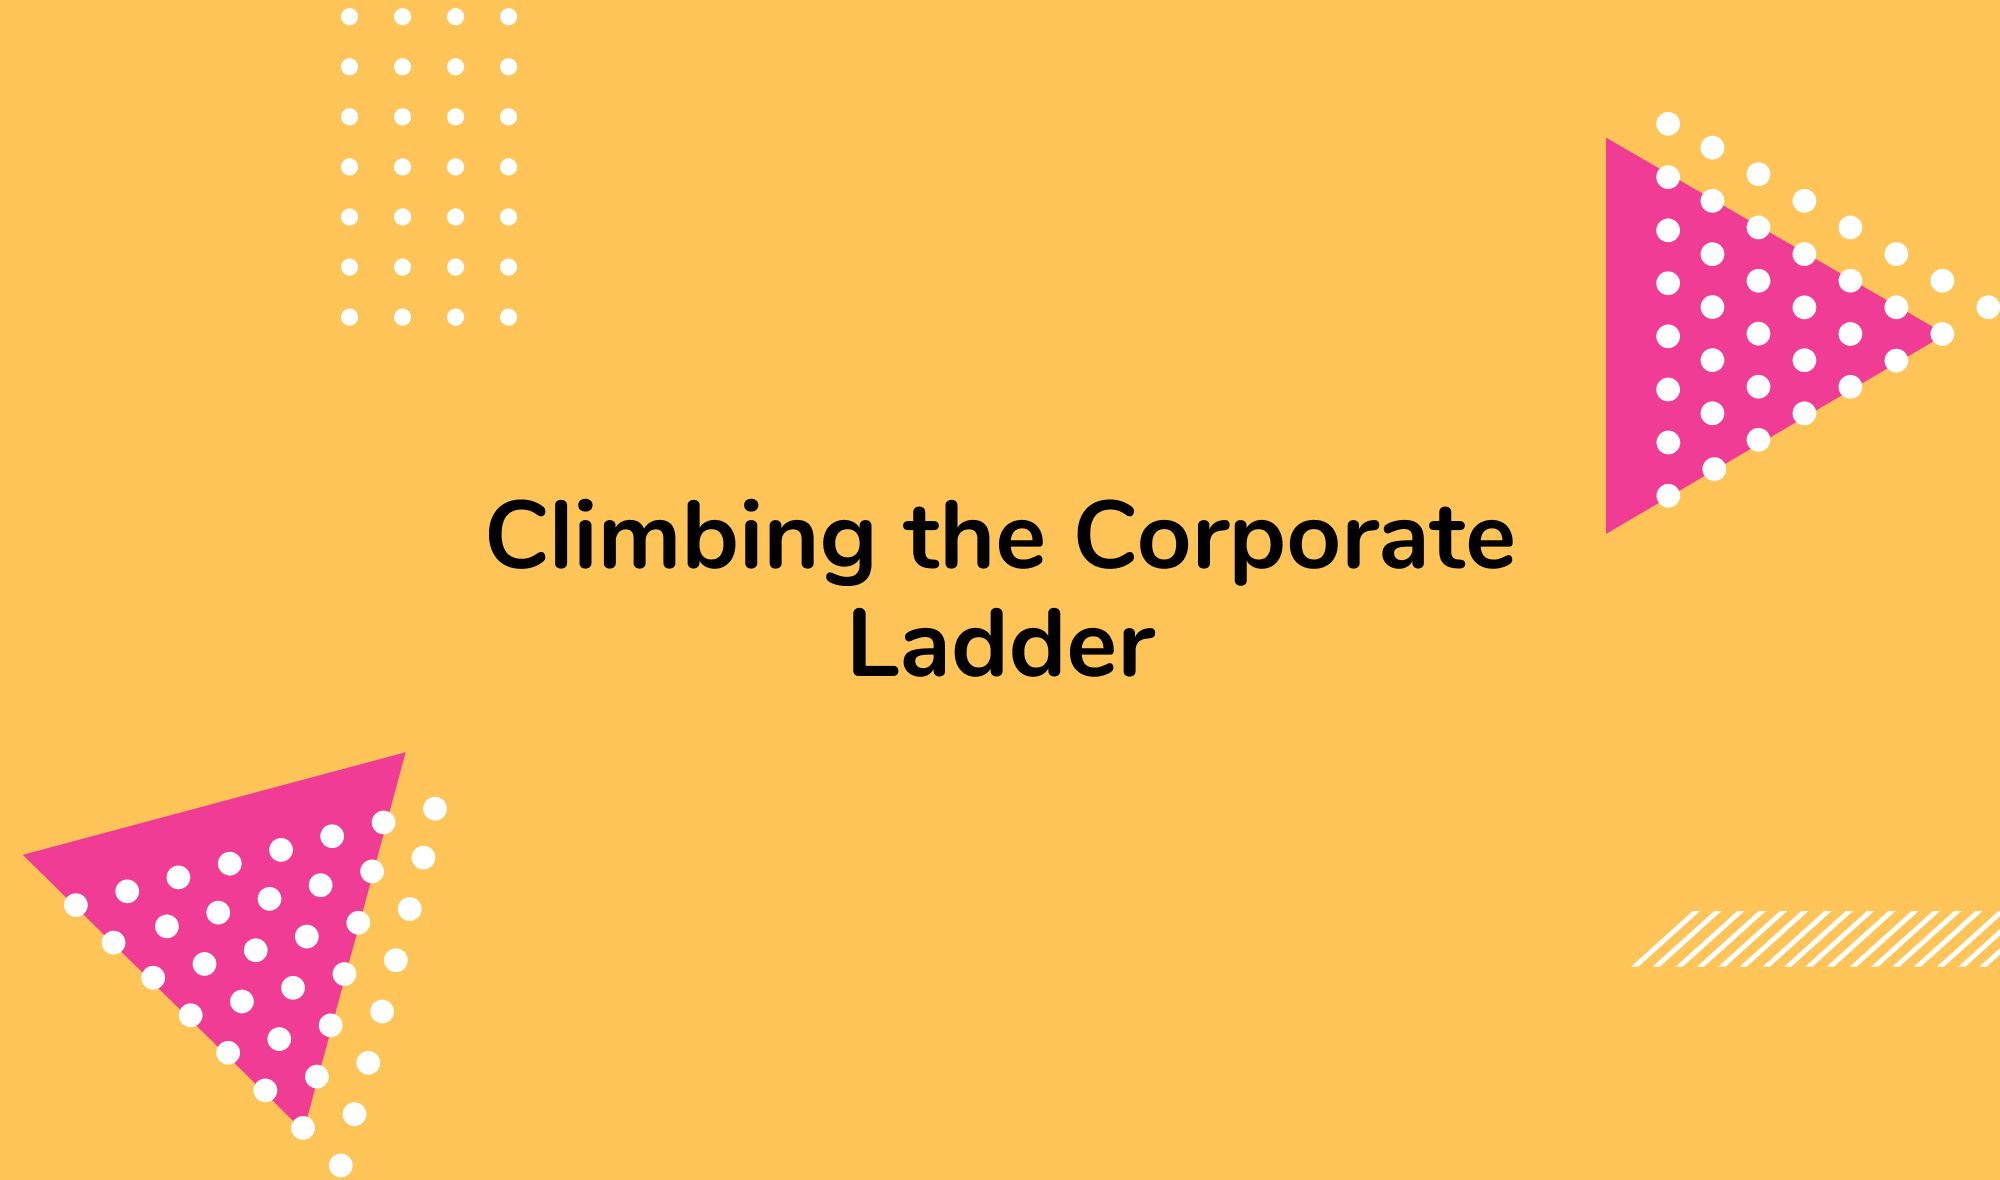 Climbing the Corporate Ladder: How to Attain a Job as a Director or VP